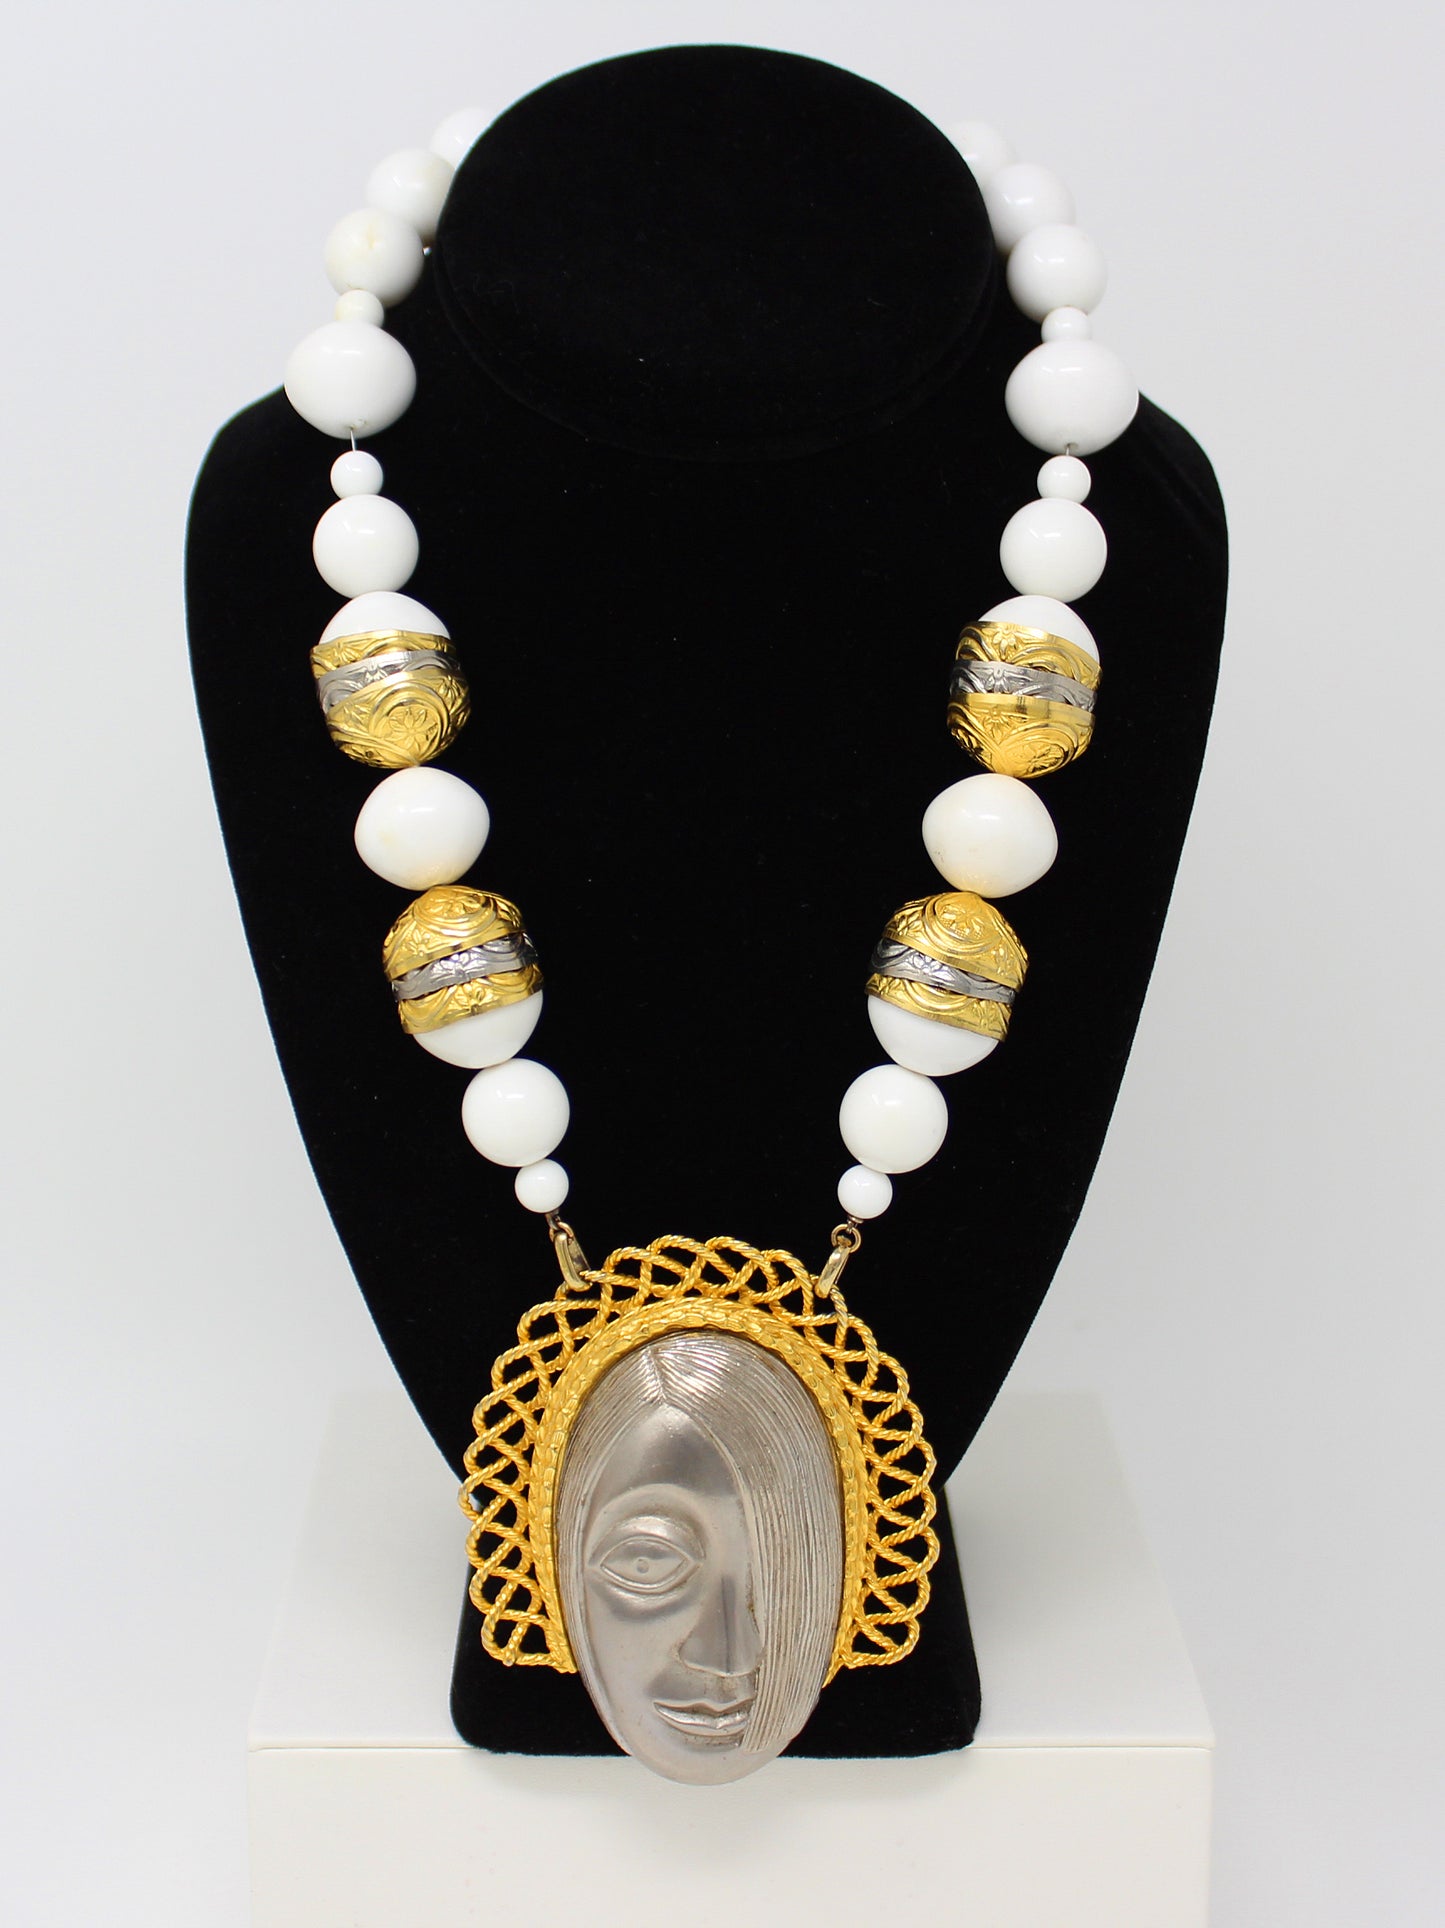 Vintage Deco Style Face Pendant Necklace with Large White Plastic Beads and Decorative Gold and Silver Tone Bead Caps